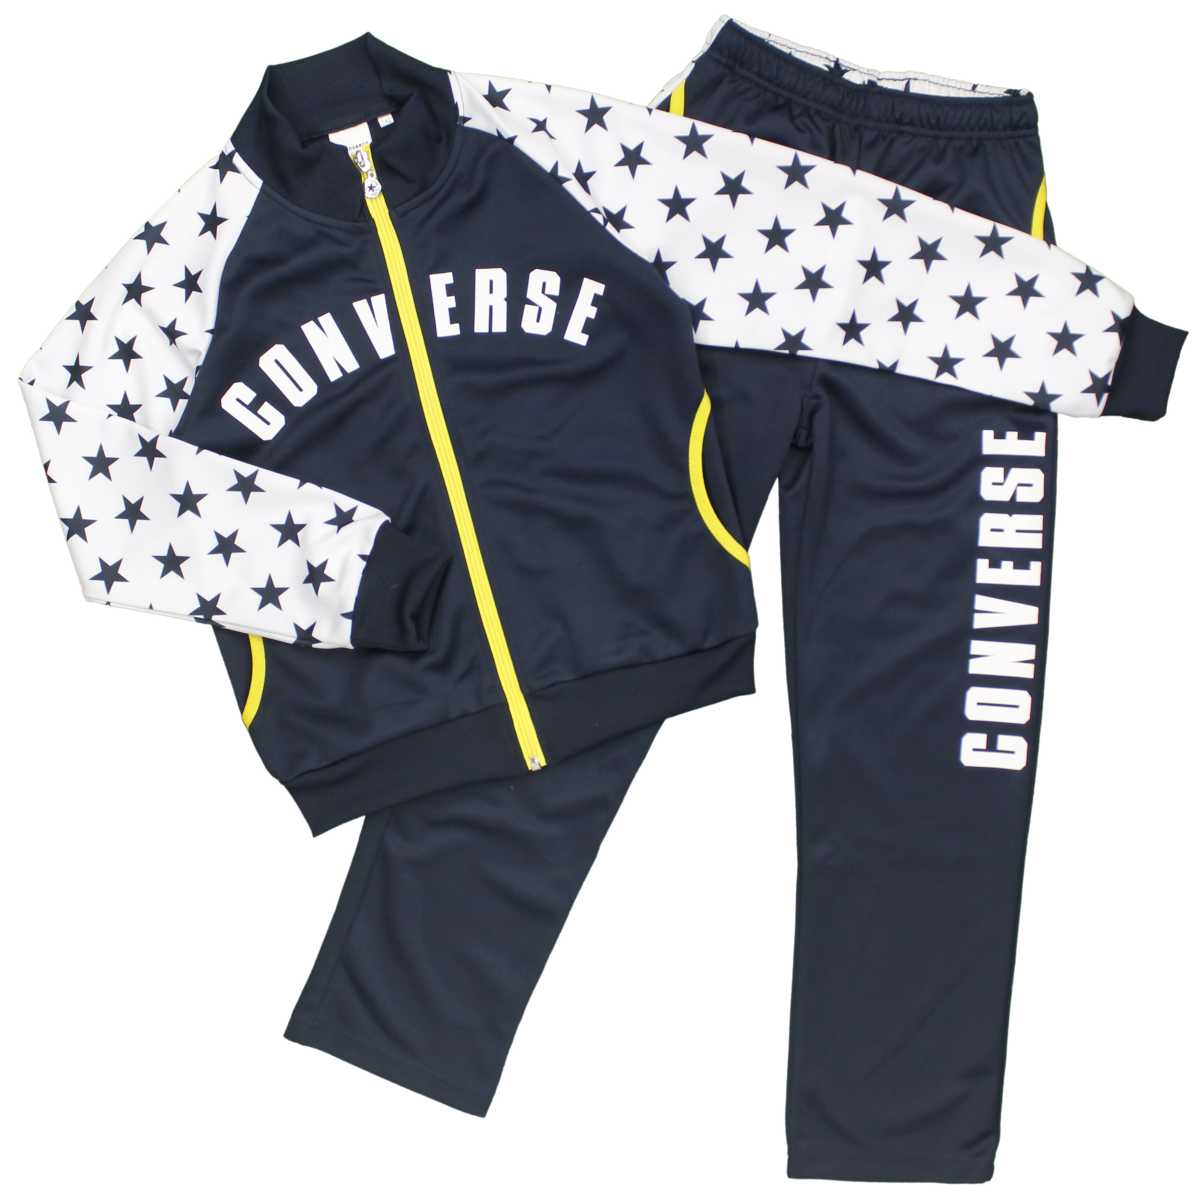 converse tracksuit top and bottoms